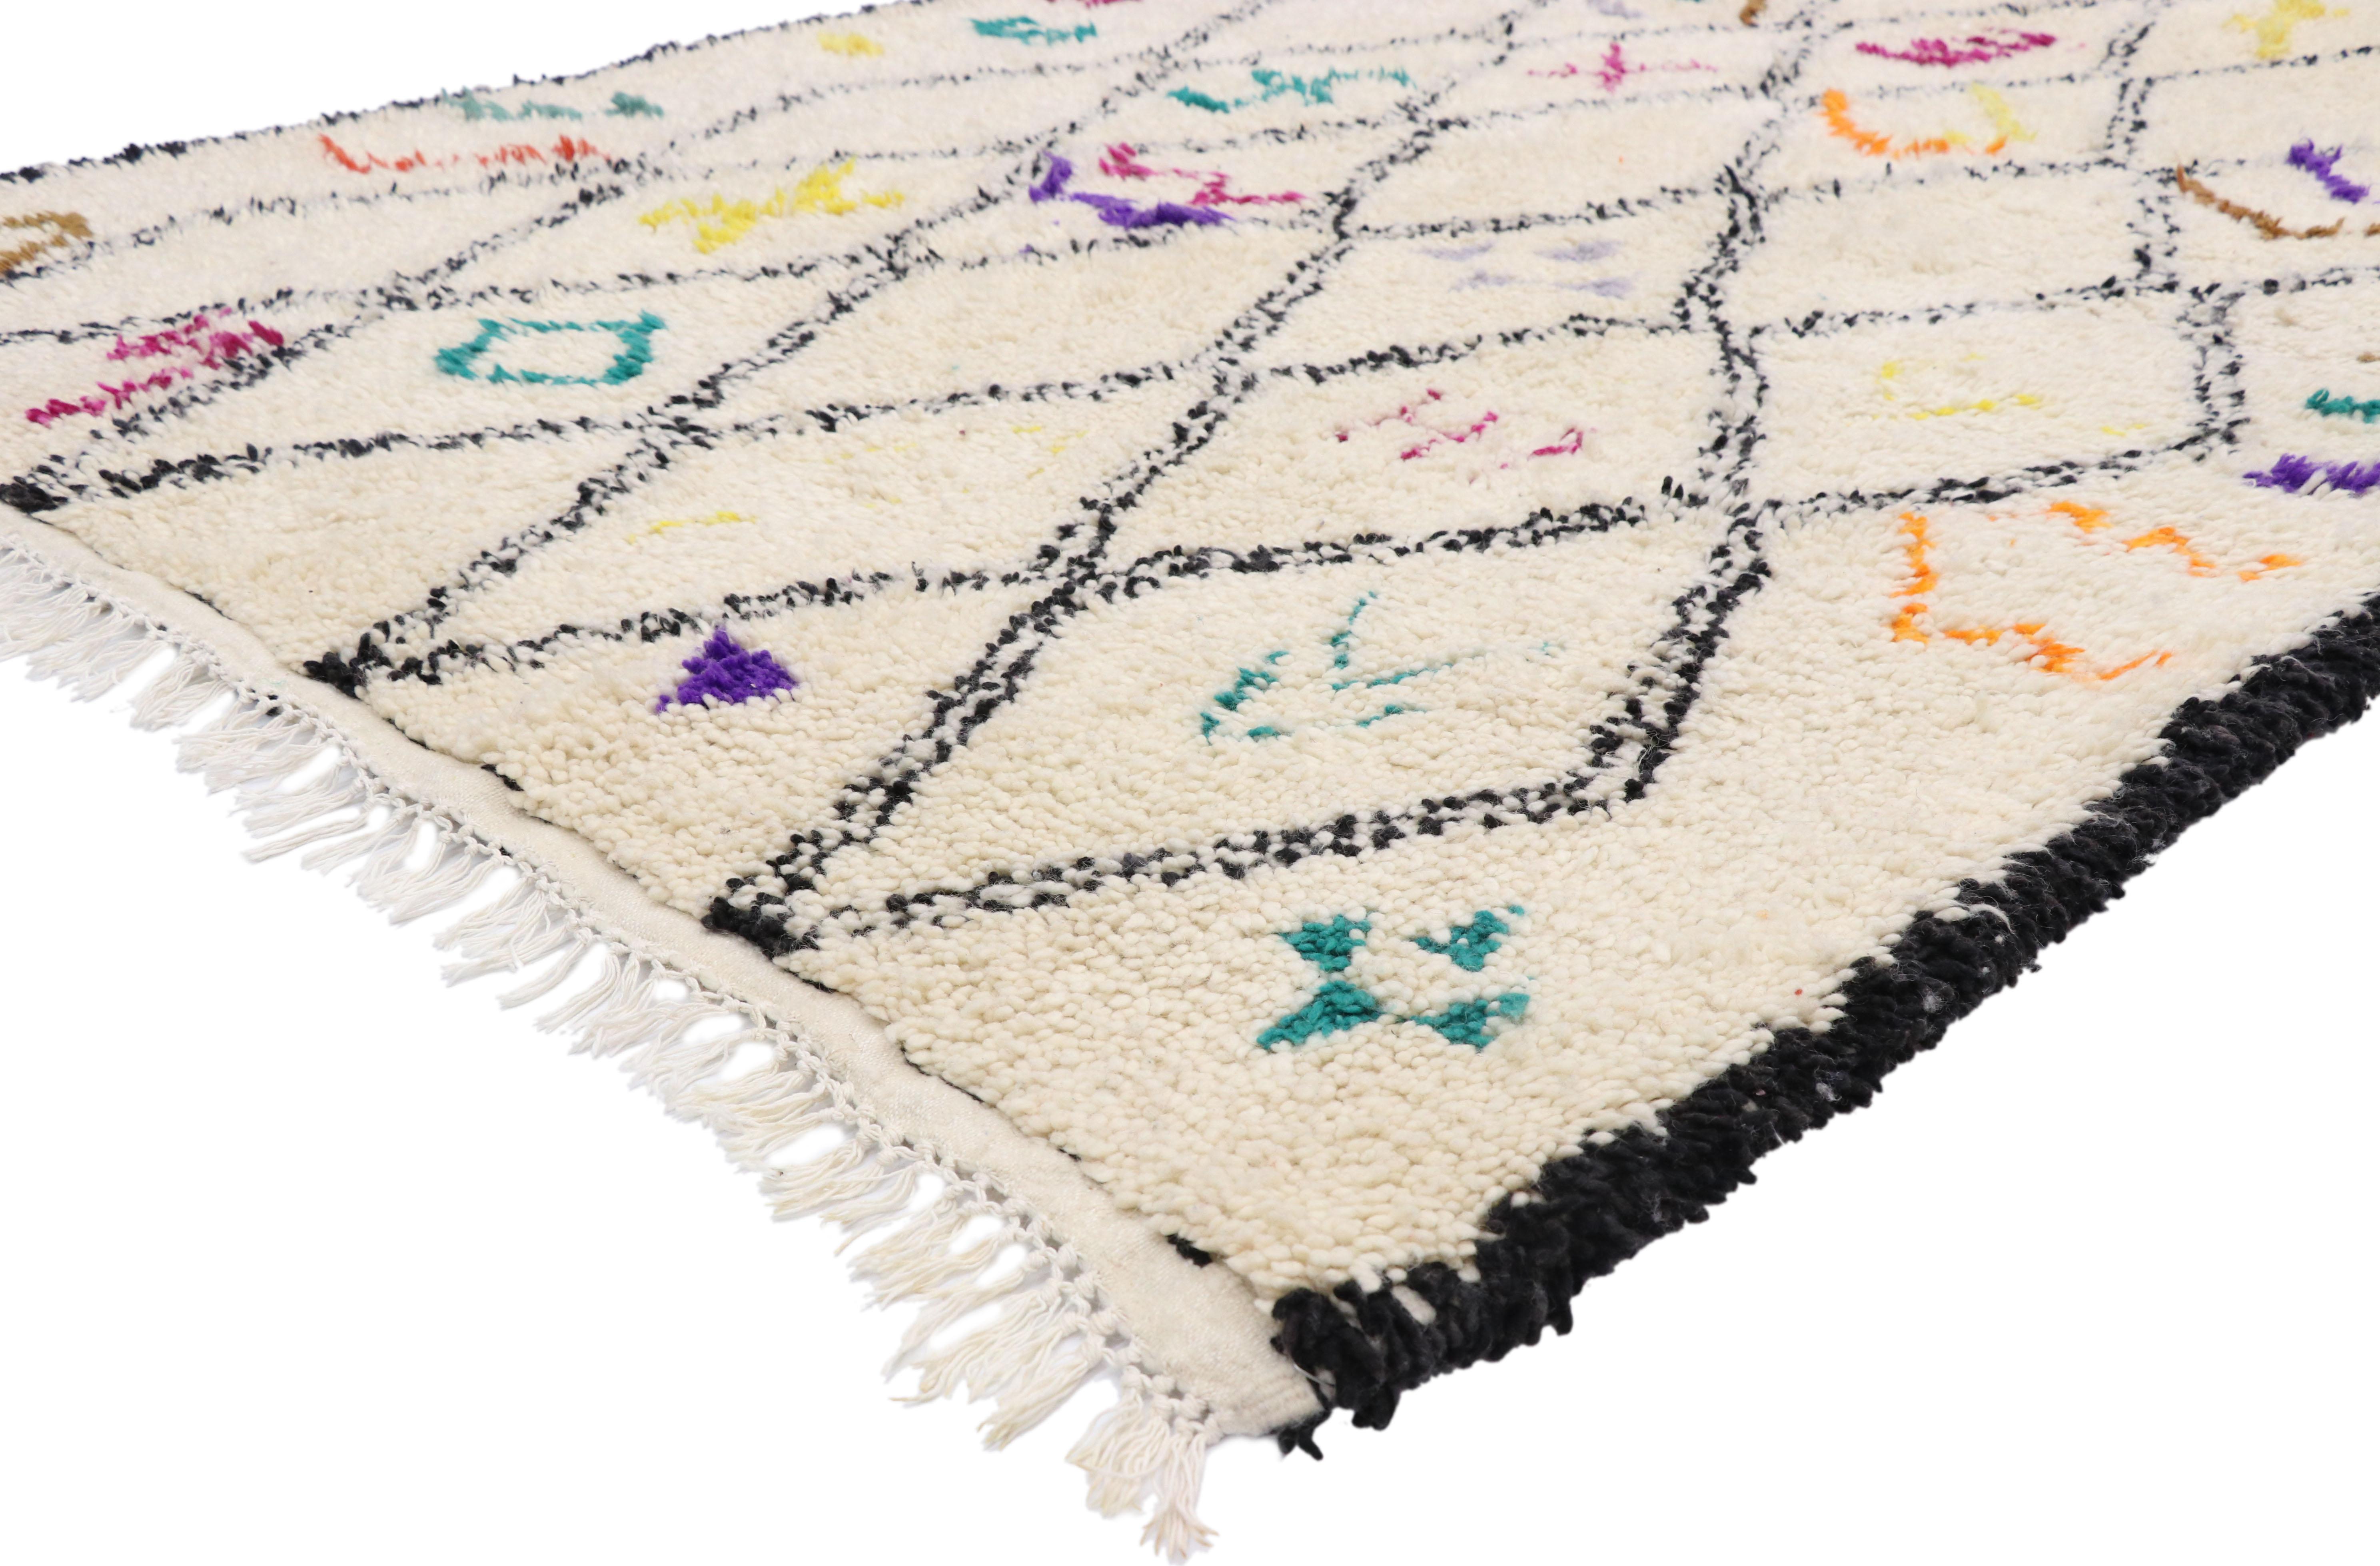 21030 New Contemporary Berber Moroccan Azilal Rug with Hygge Bohemian Tribal Style 06'01 x 09'01. This hand knotted wool contemporary Berber Moroccan Azilal rug features an all-over diamond lattice pattern composed of contrasting charcoal black